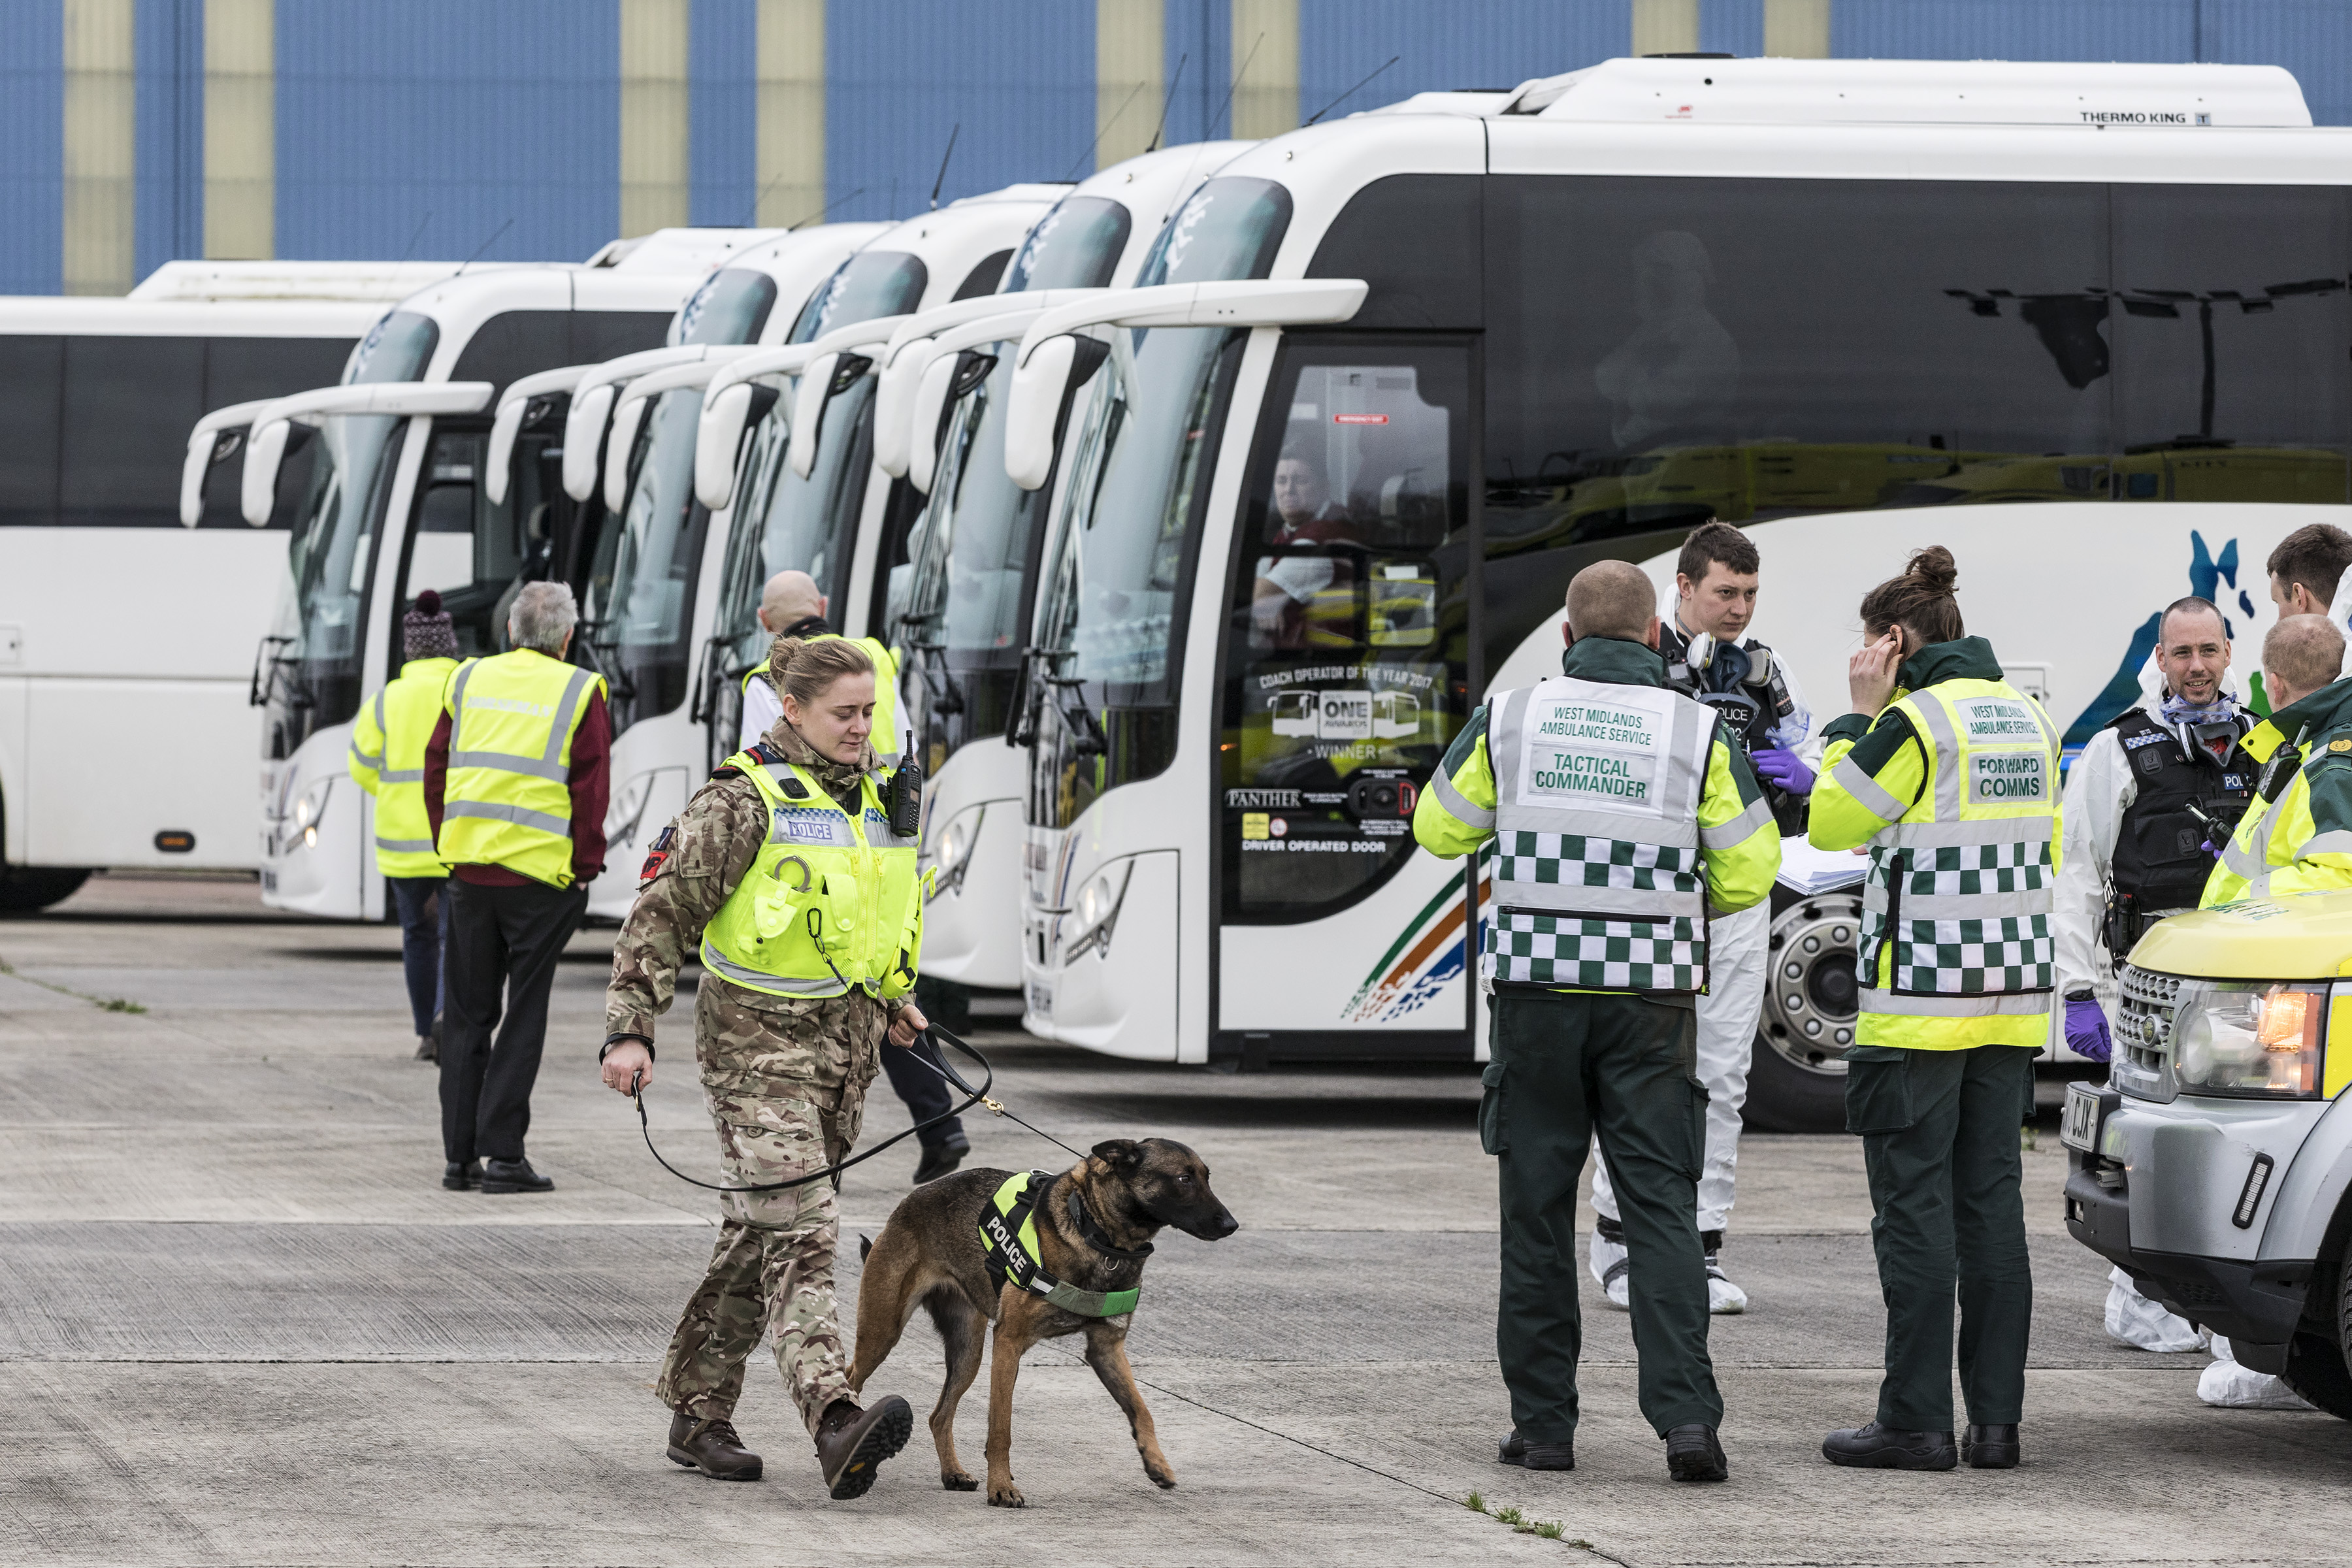 RAF Police walks dog, with other personnel in high vis and coaches in background.